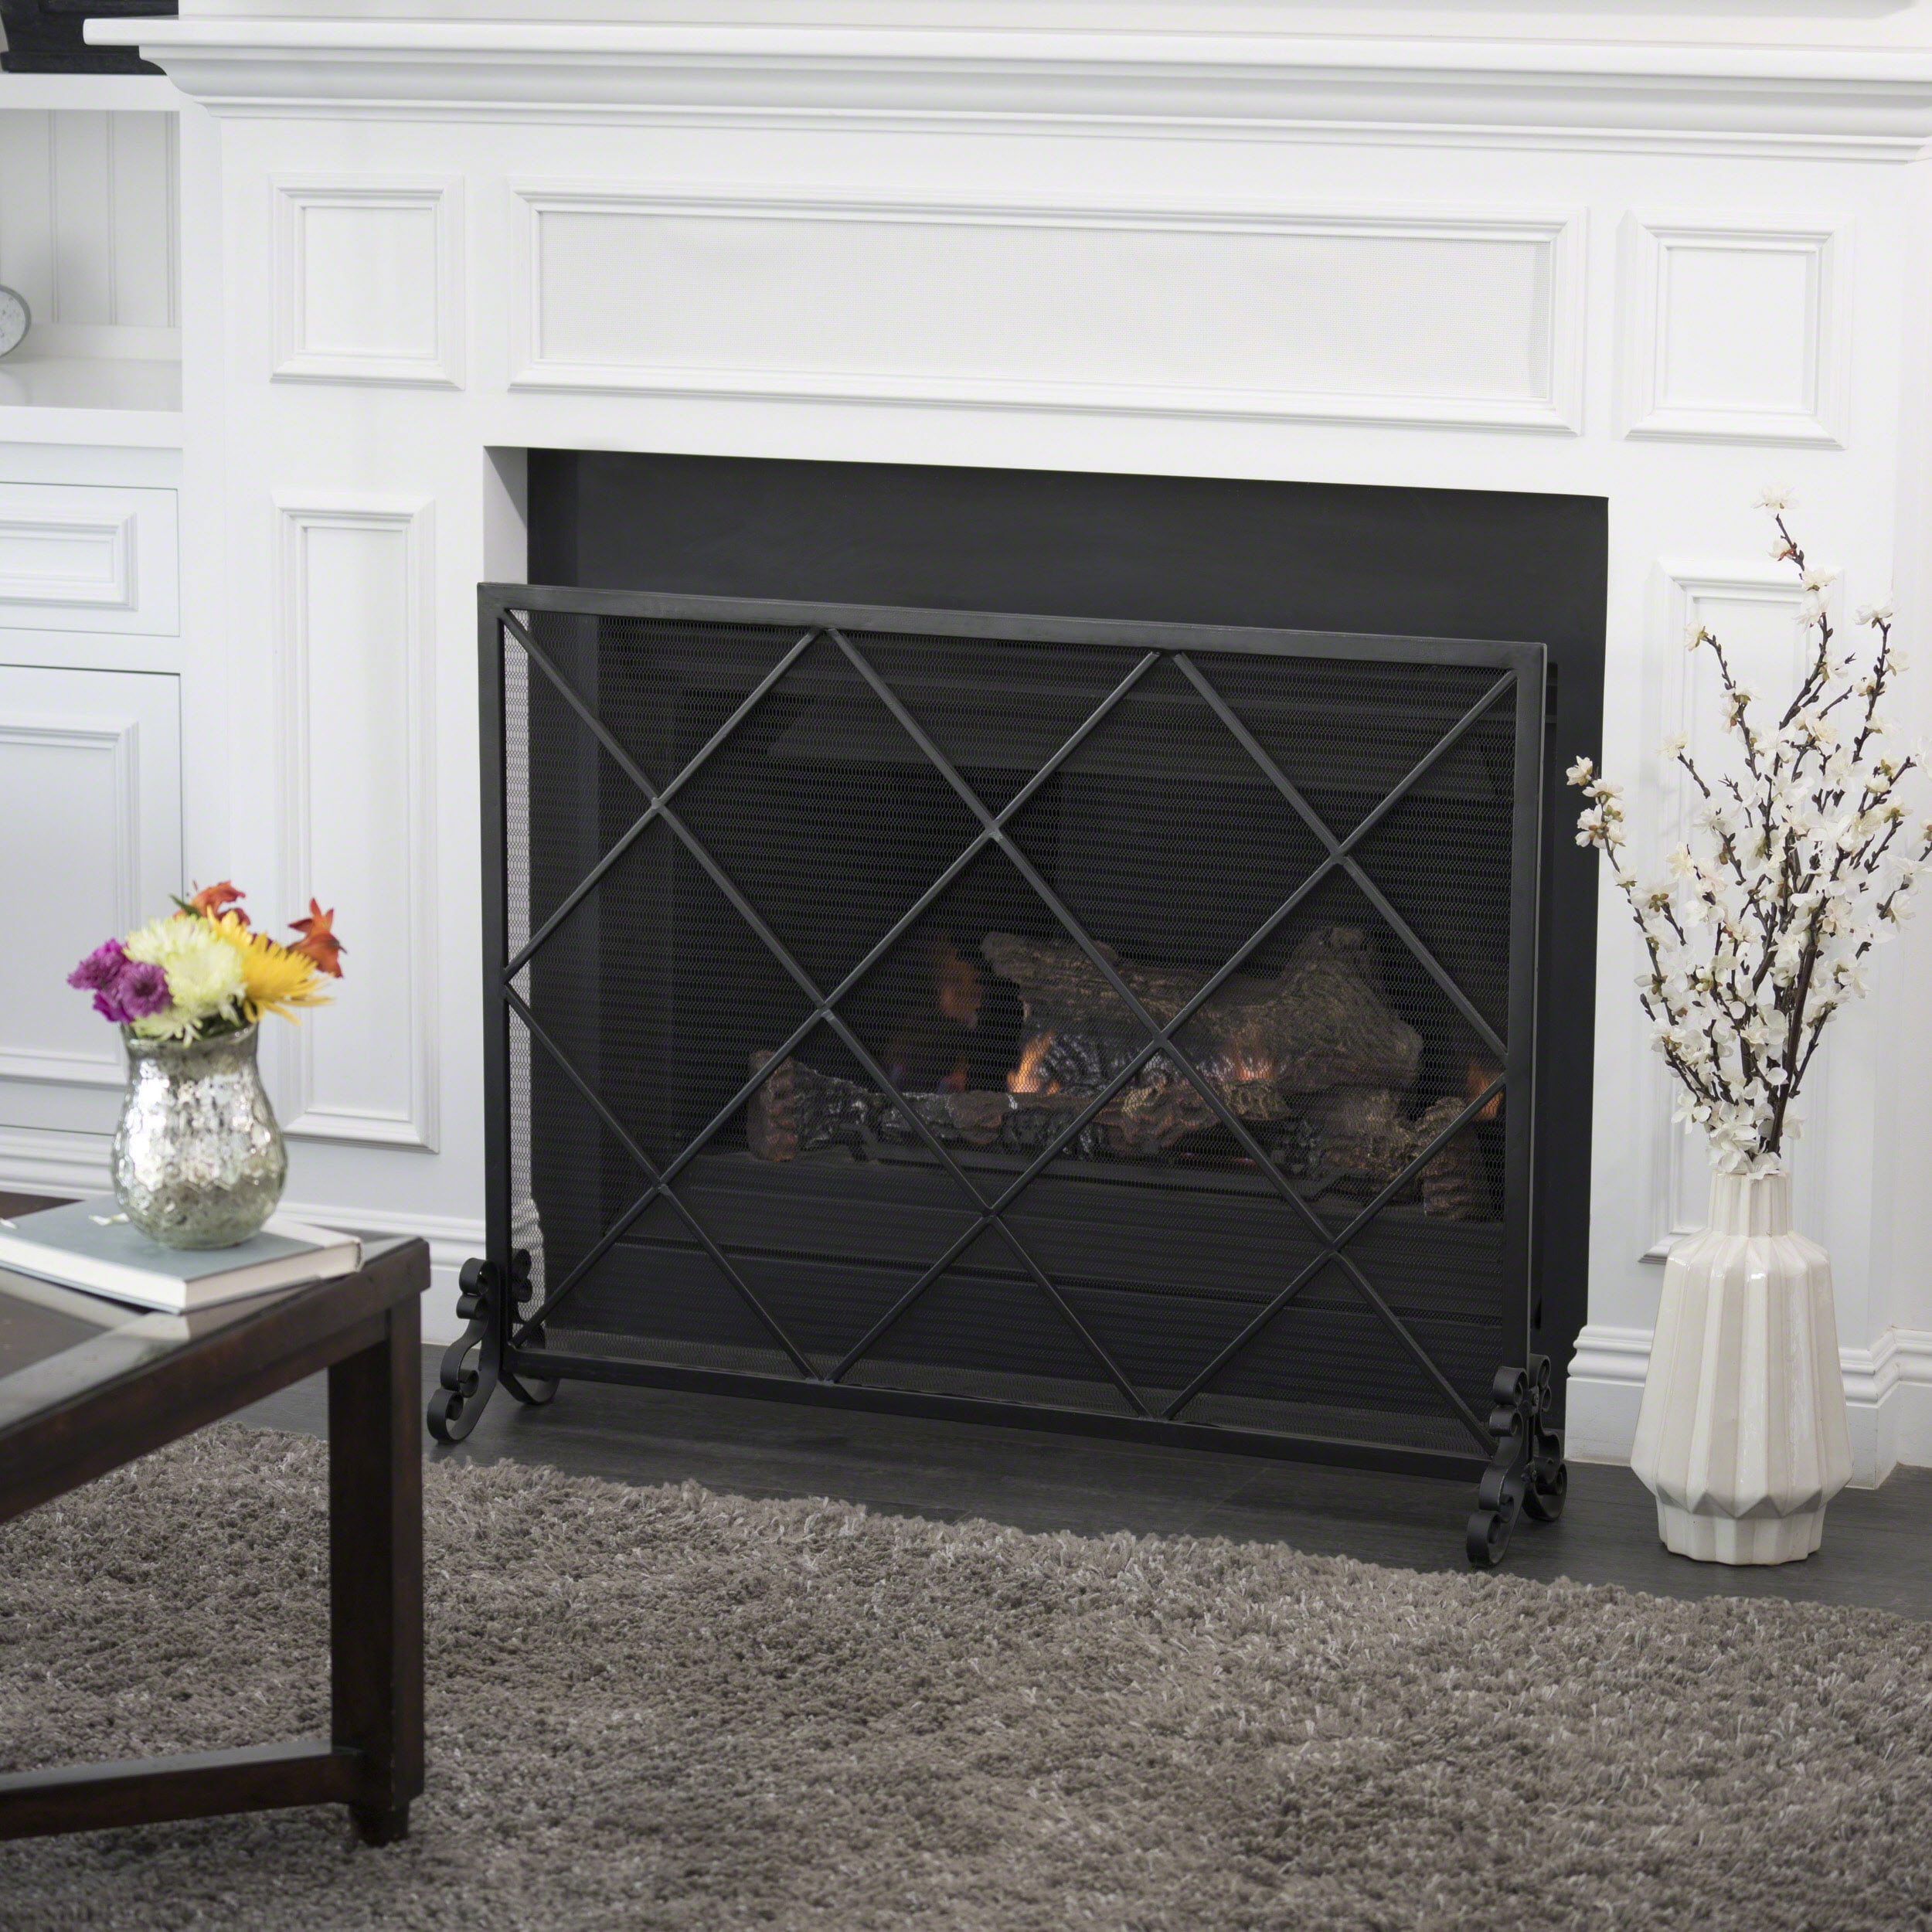 Williams Sonoma Fireplace Screen Fireplace Guide By Linda